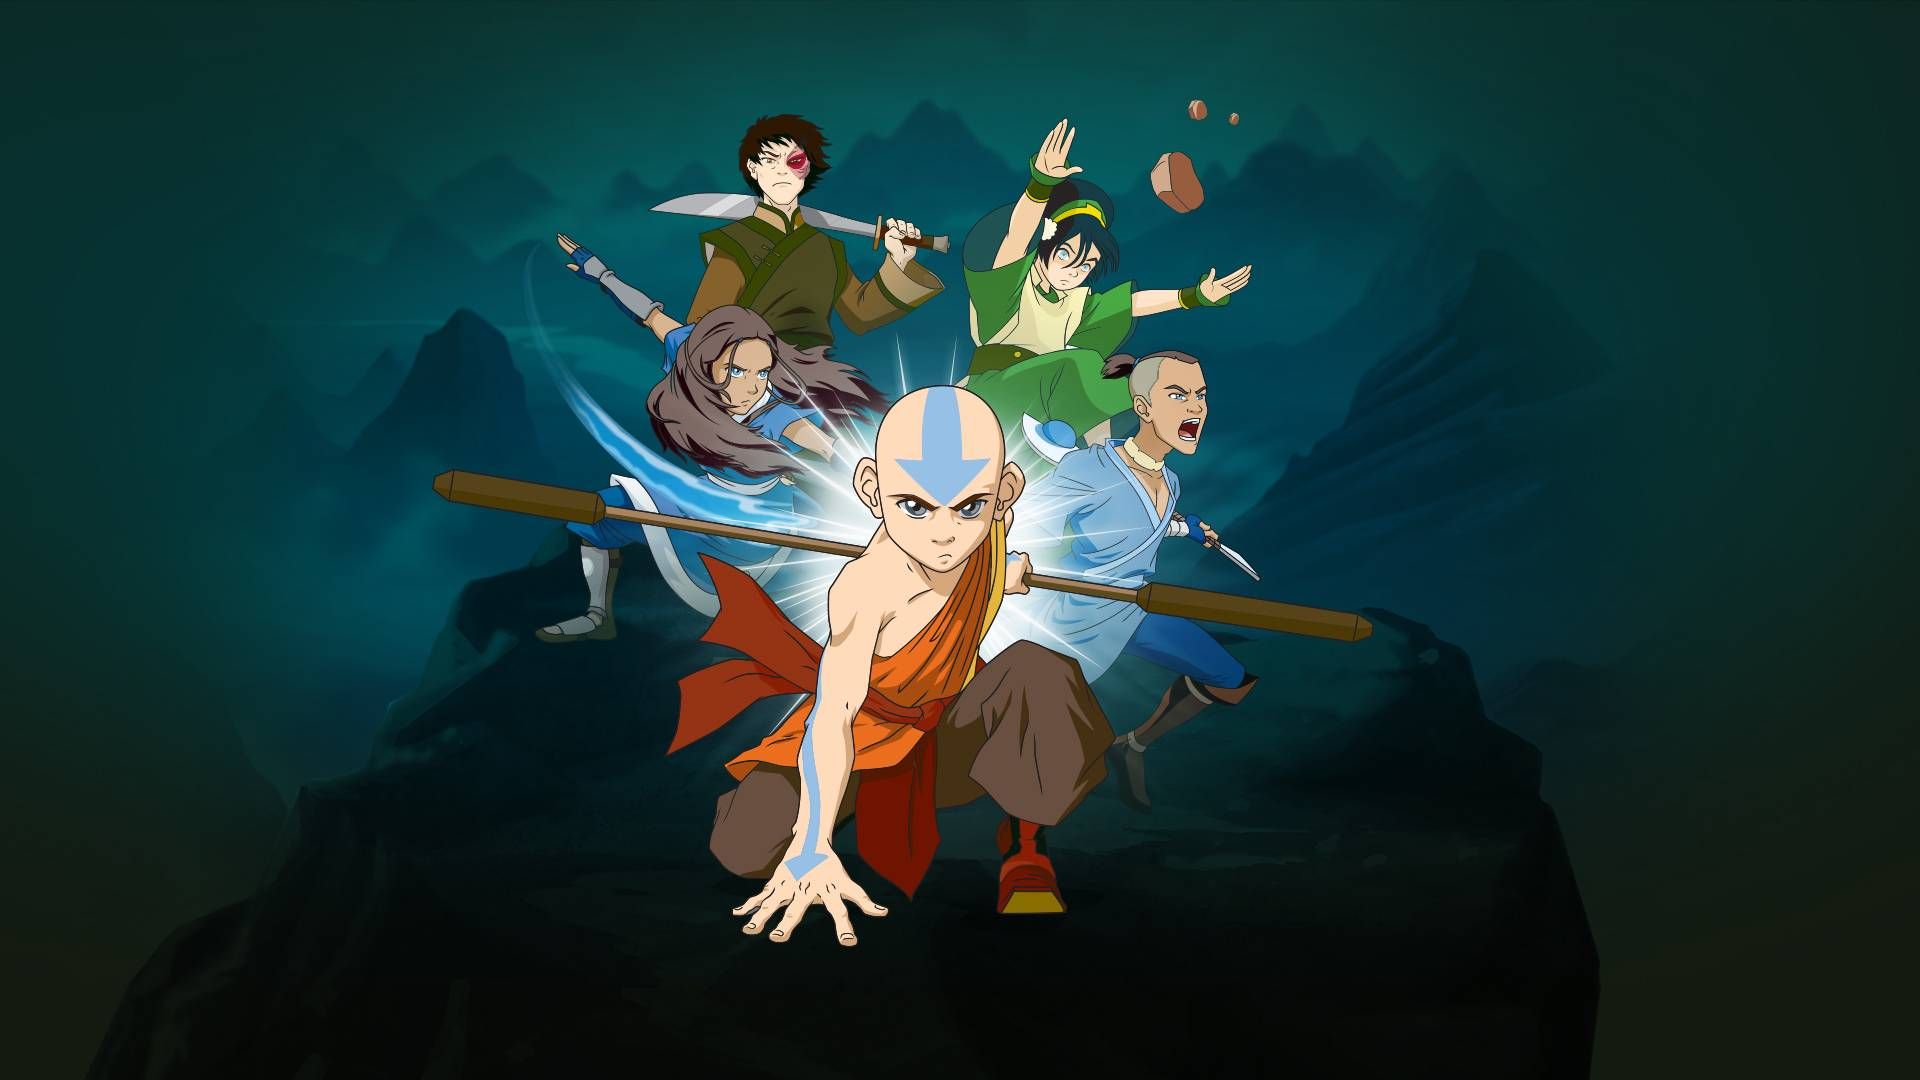 olidraws 6 Avatar the Last Airbender Characters Fan Arts part 1 and 2   rTheLastAirbender